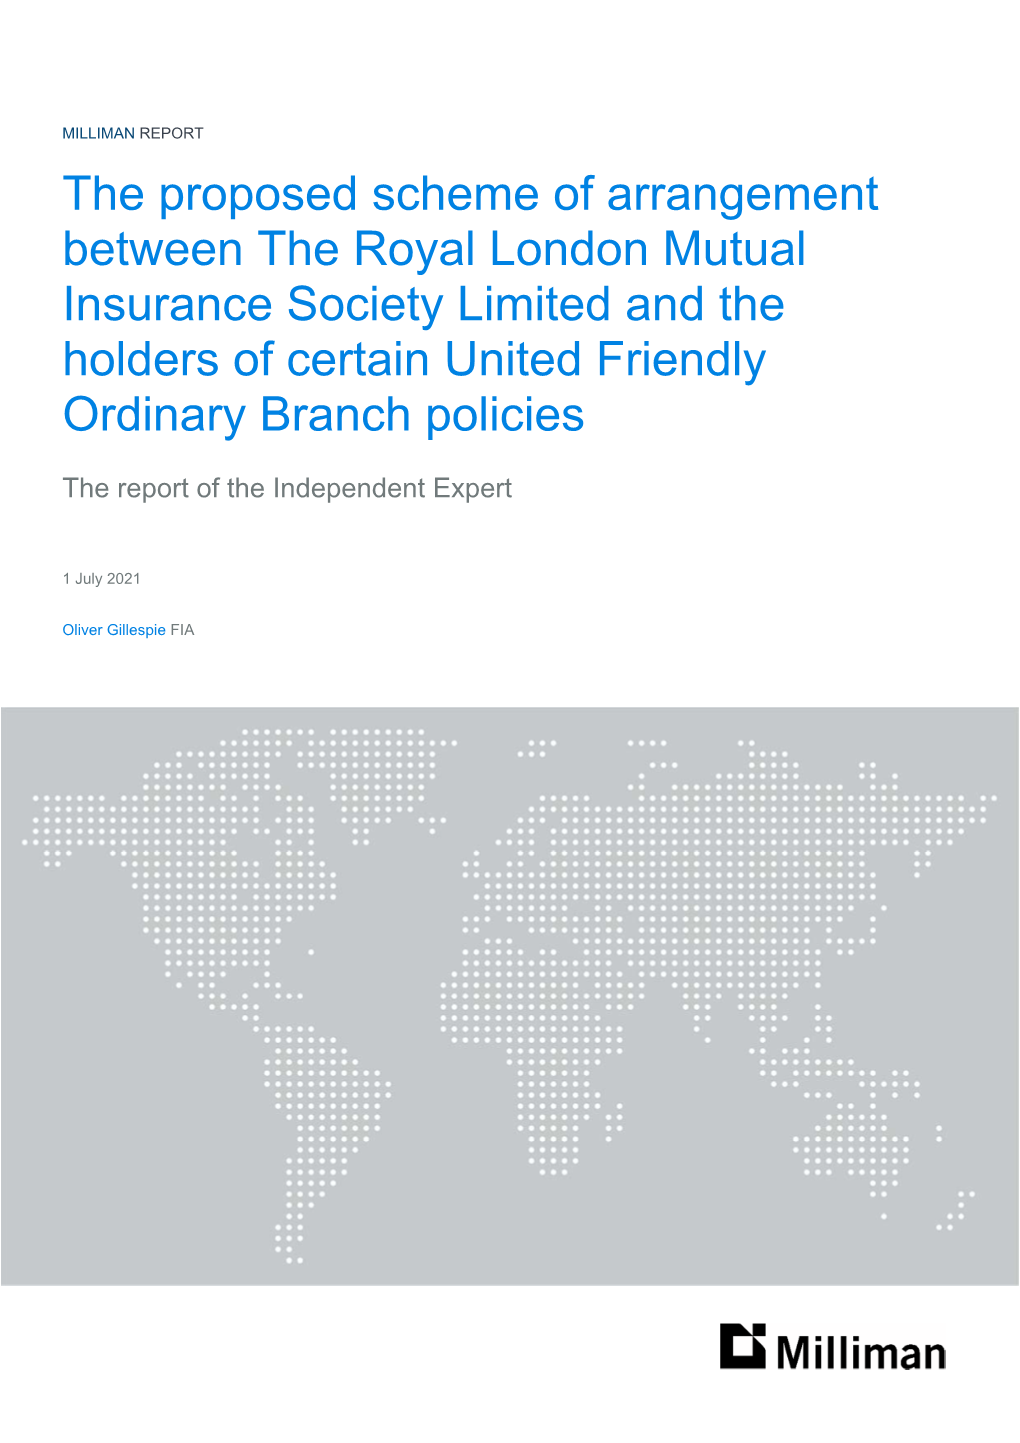 The Proposed Scheme of Arrangement Between the Royal London Mutual Insurance Society Limited and the Holders of Certain United Friendly Ordinary Branch Policies